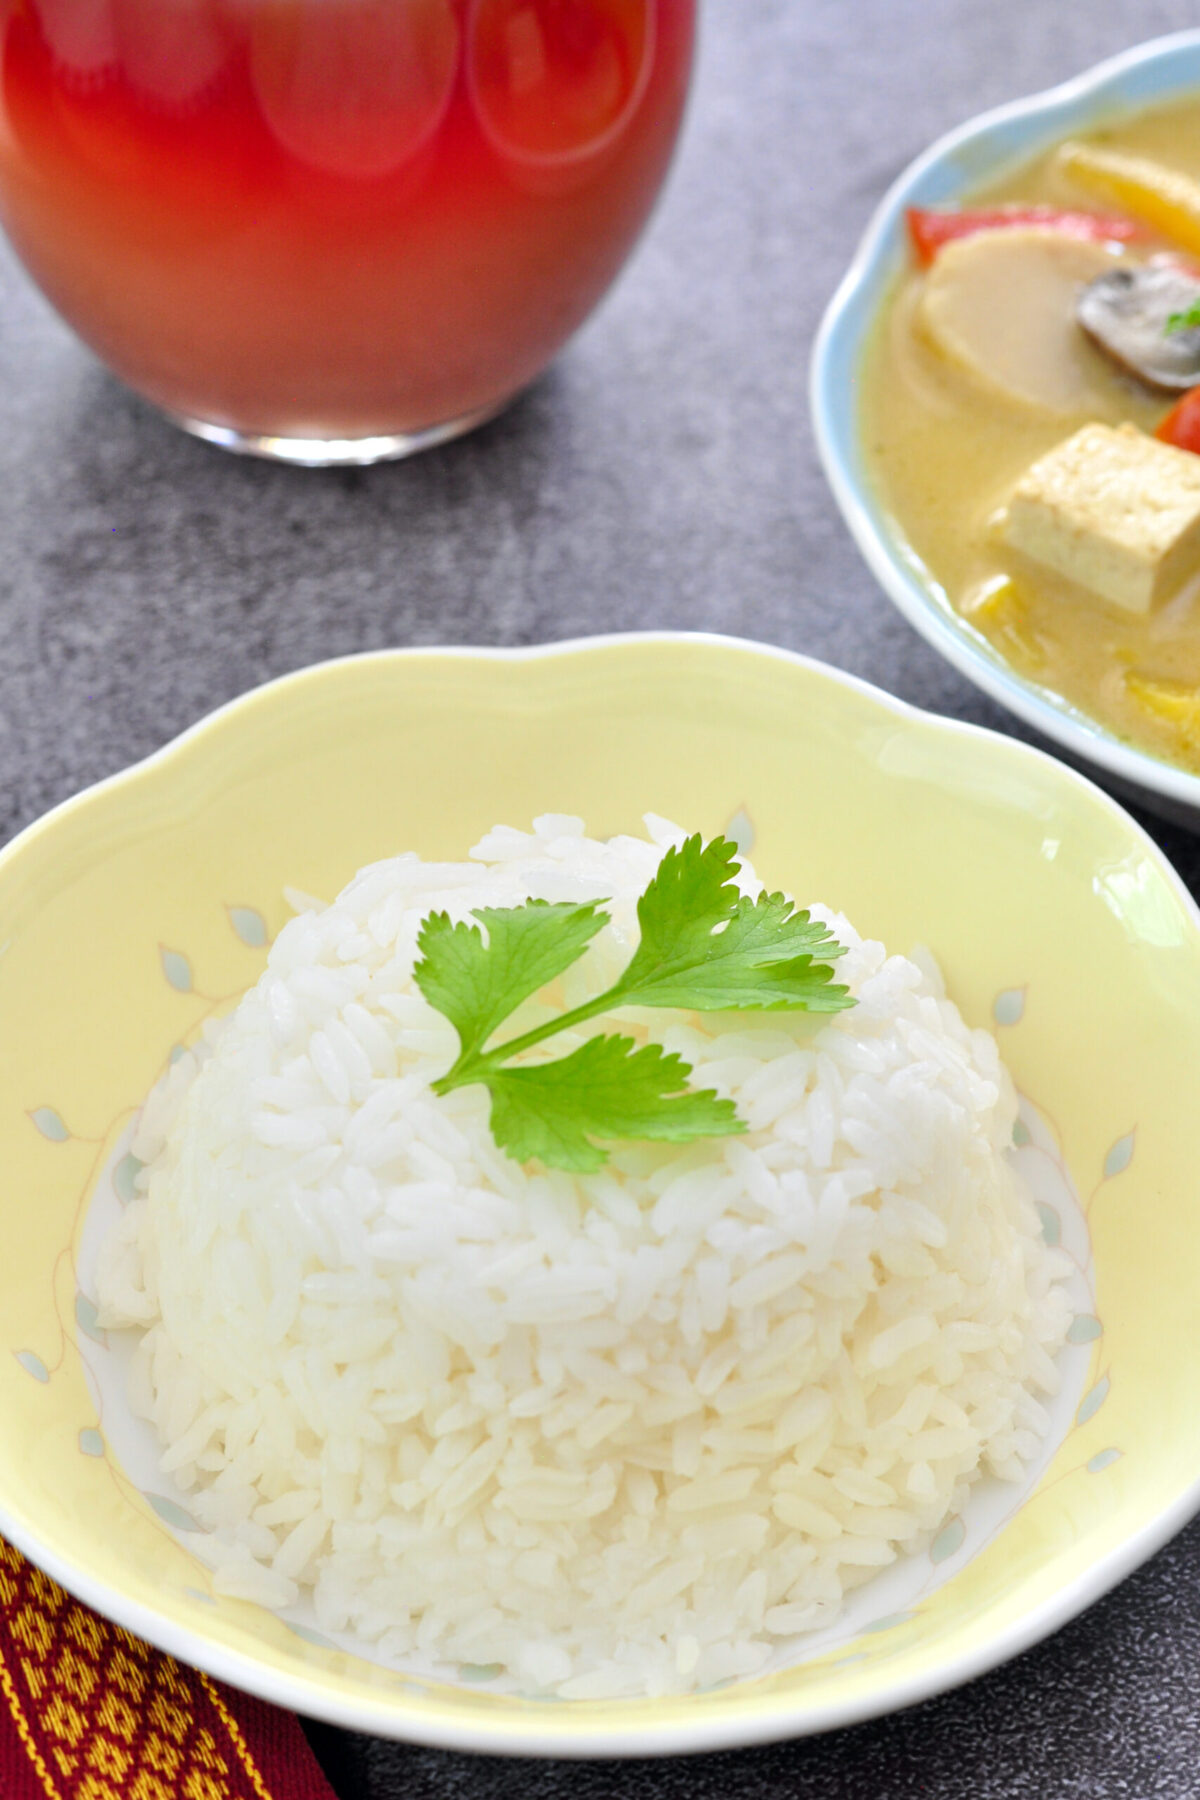 jasmine rice in a yellow bowl.